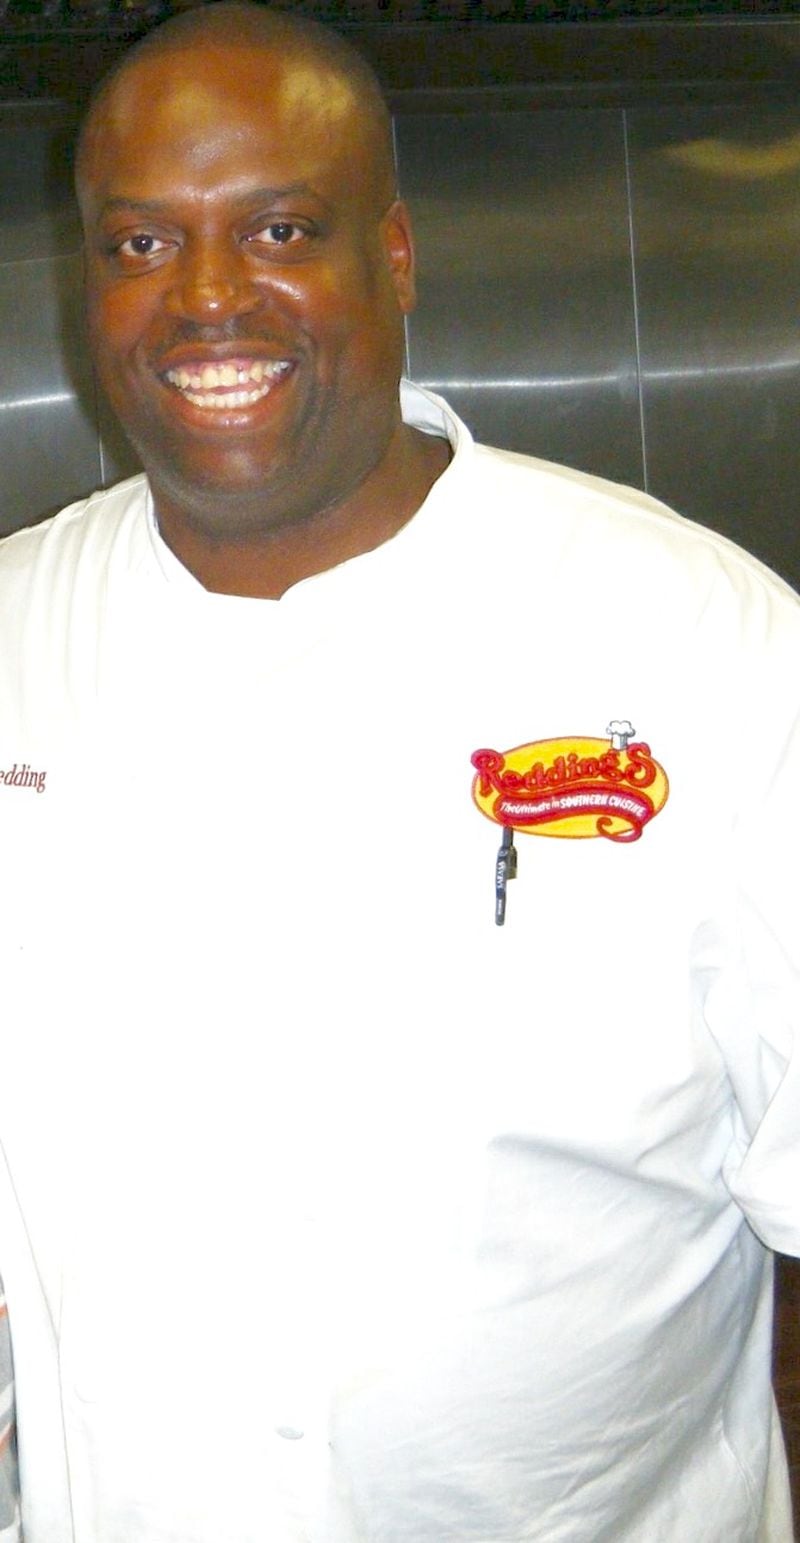 Chef Carl Redding is opening Redding's Restaurant this summer in the Pittsburgh community of Southwest Atlanta.